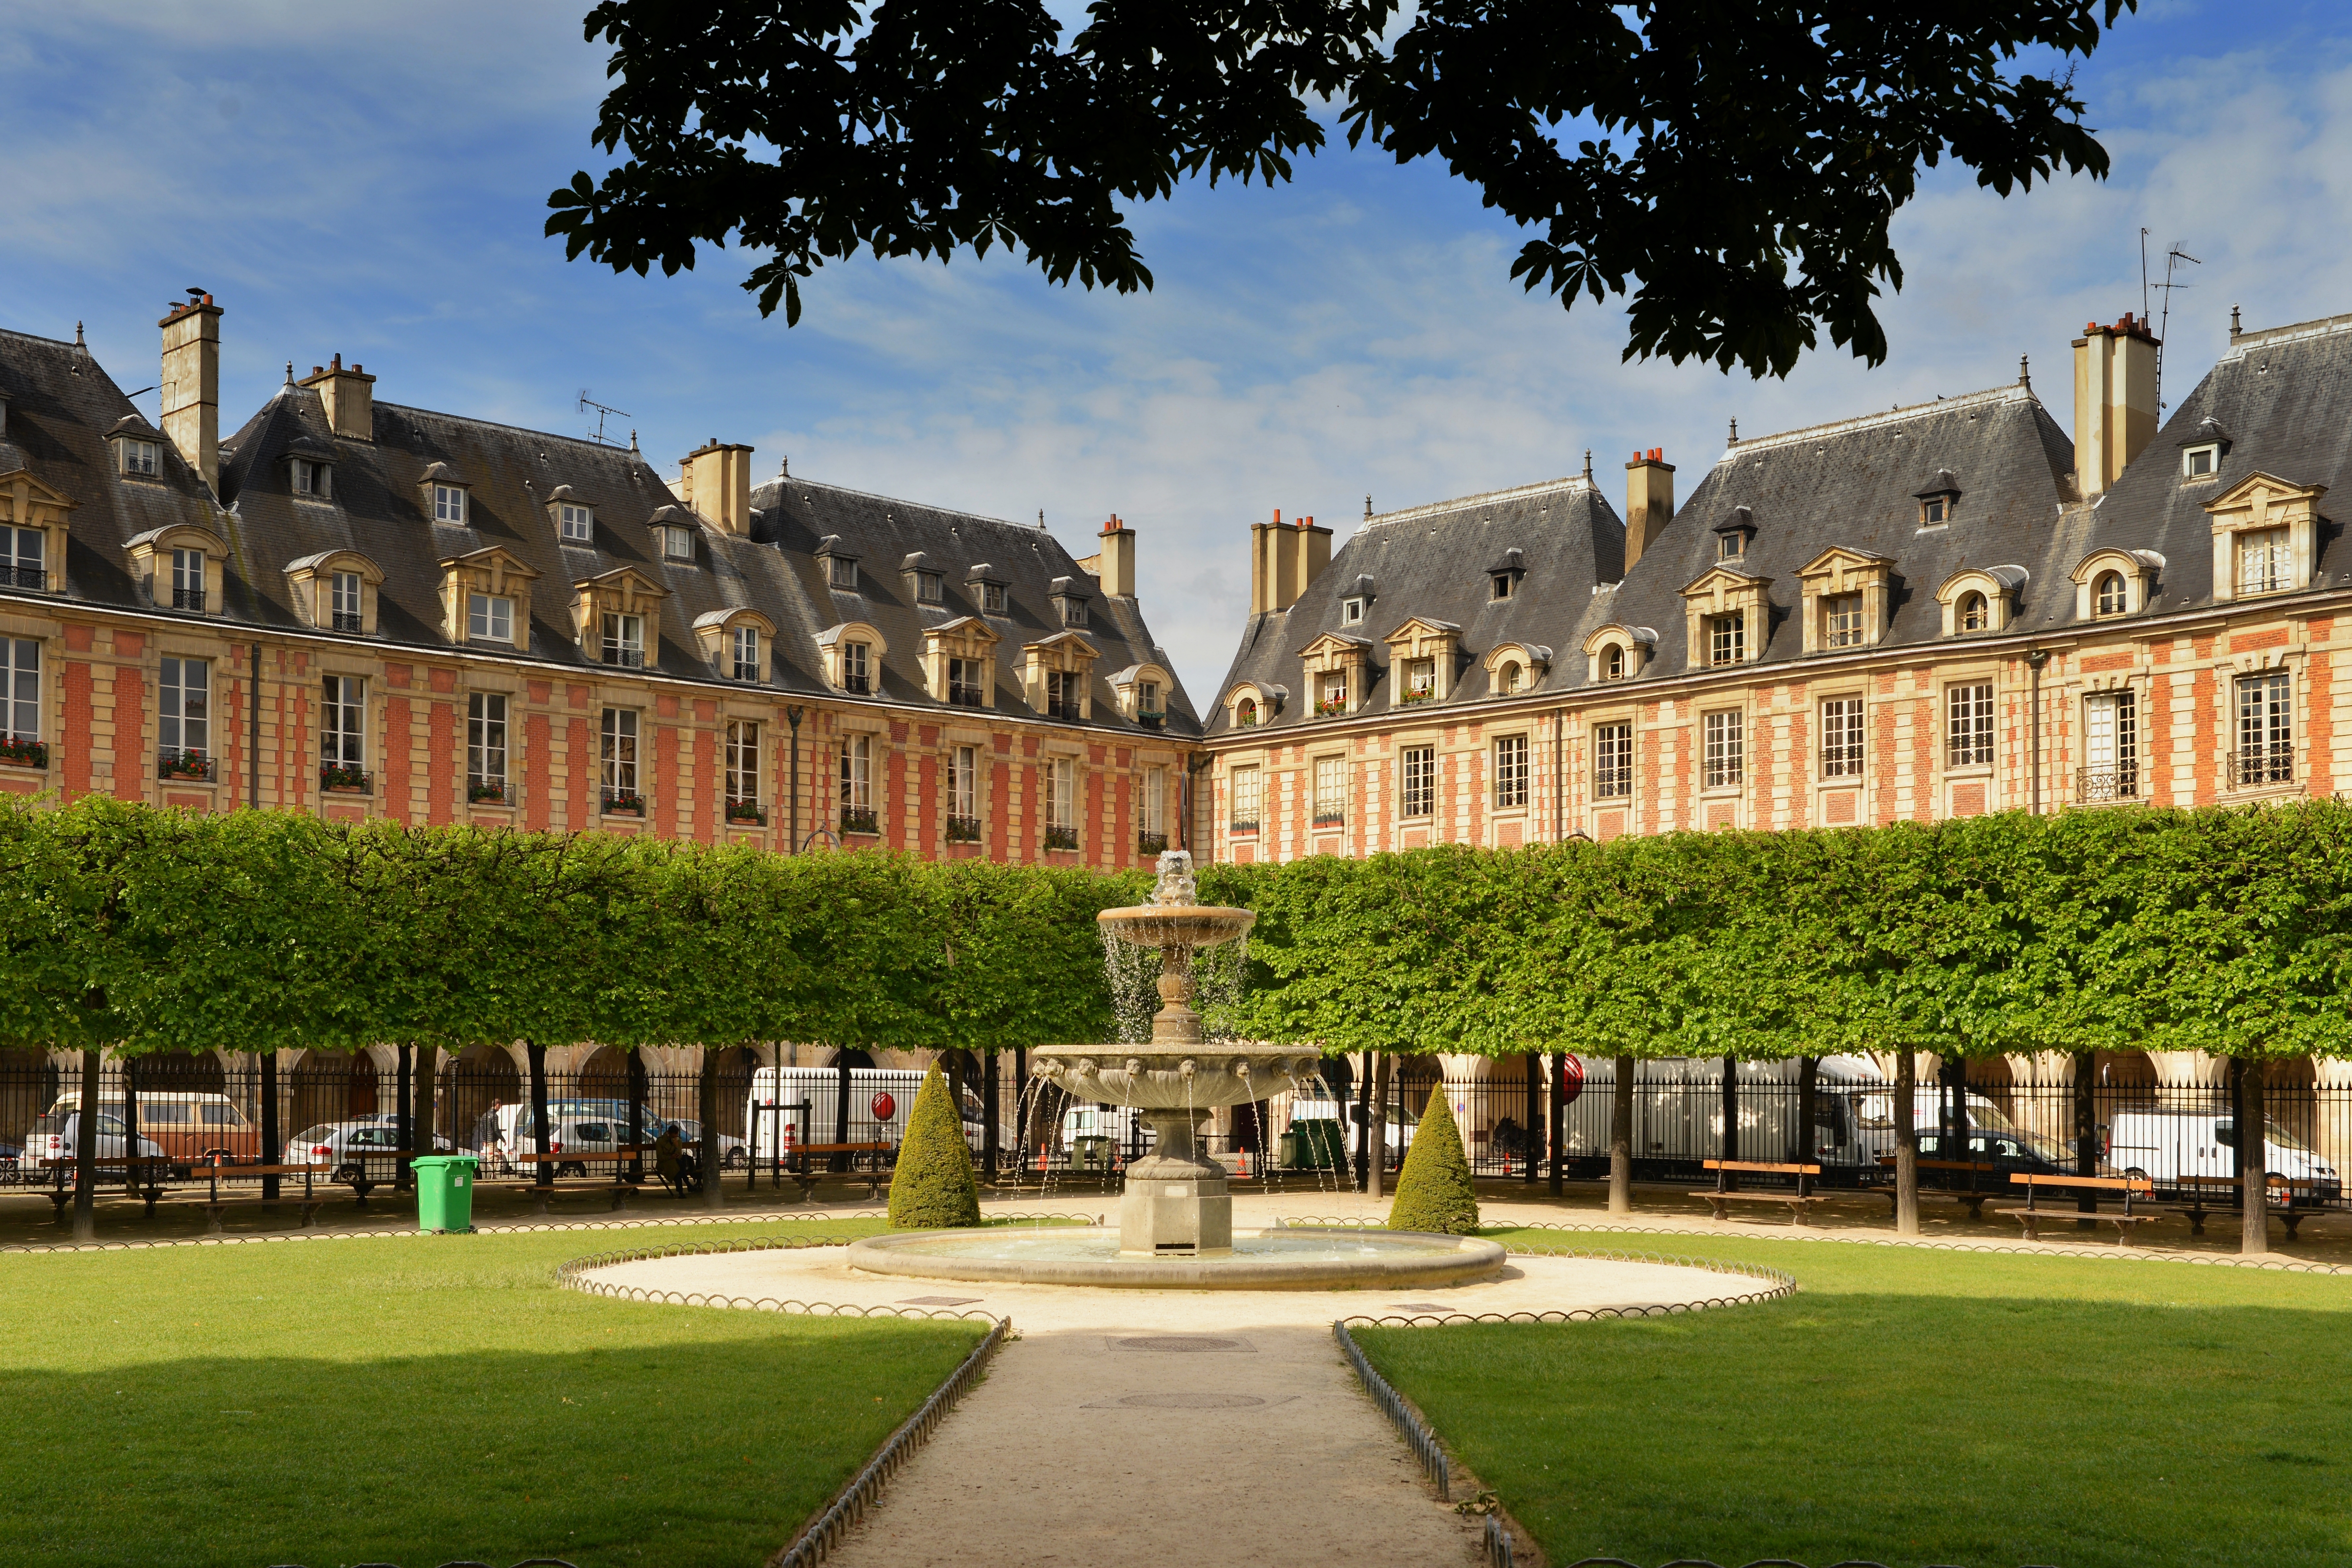 One of the oldest squares in the city, Places des Vosges